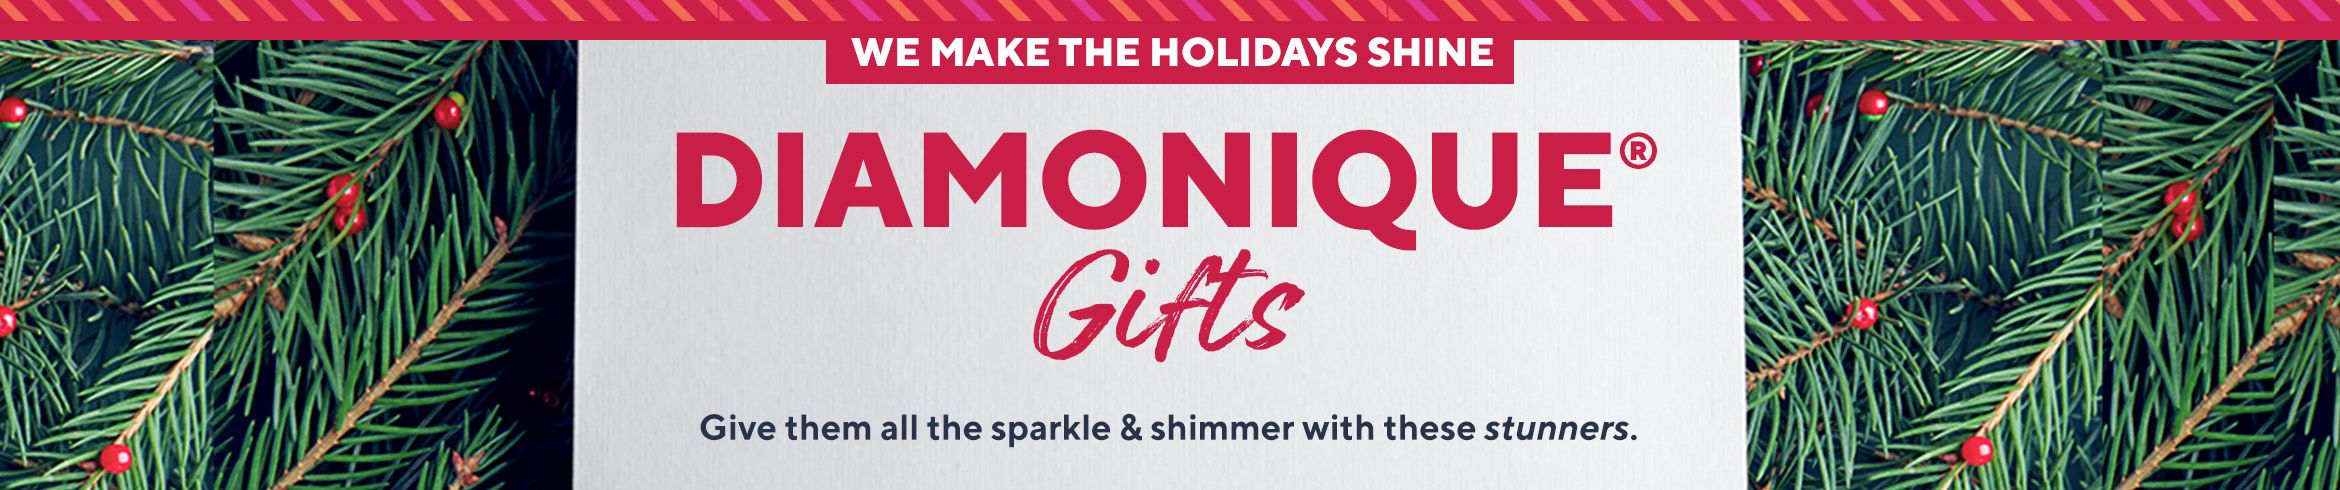 We Make The Holidays Shine  Diamonique® Gifts  Give them all the sparkle & shimmer with these stunners.